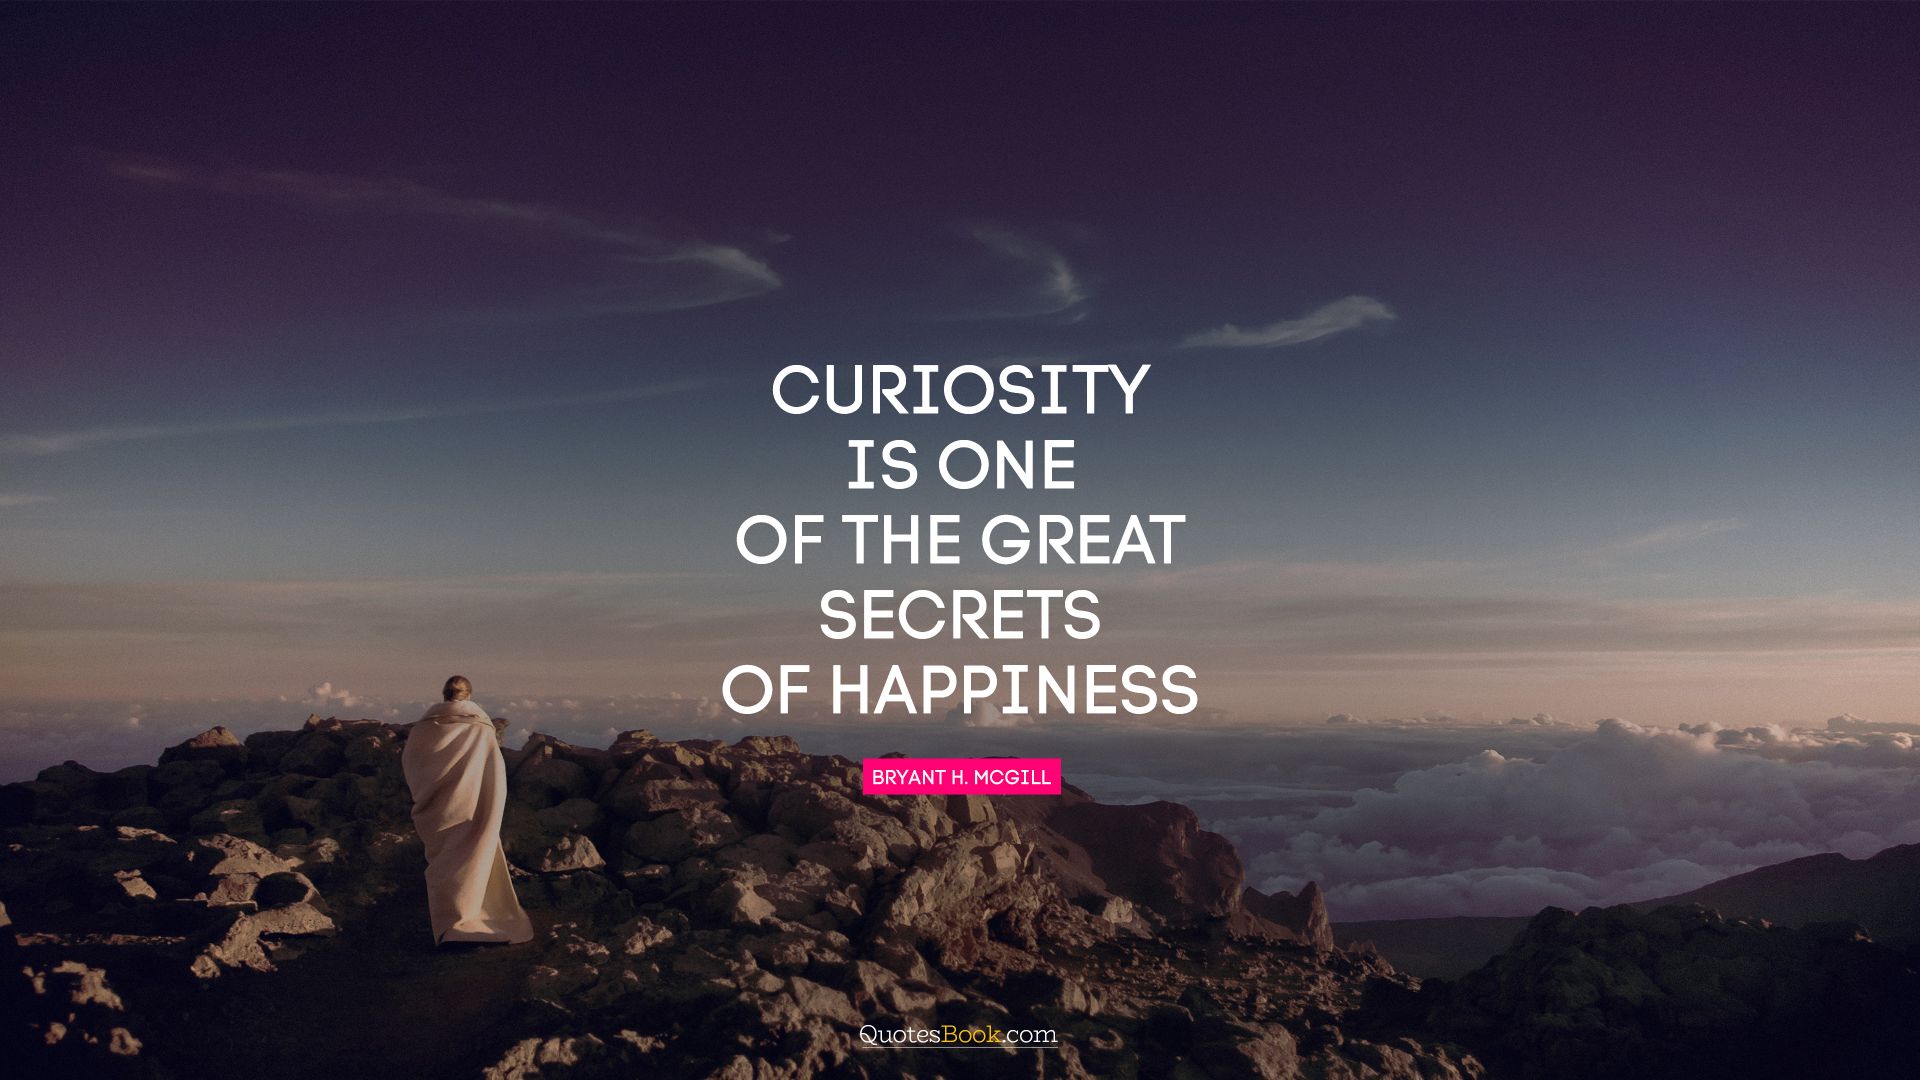 Curiosity is one of the great secrets of happiness. - Quote by Bryant H. McGill